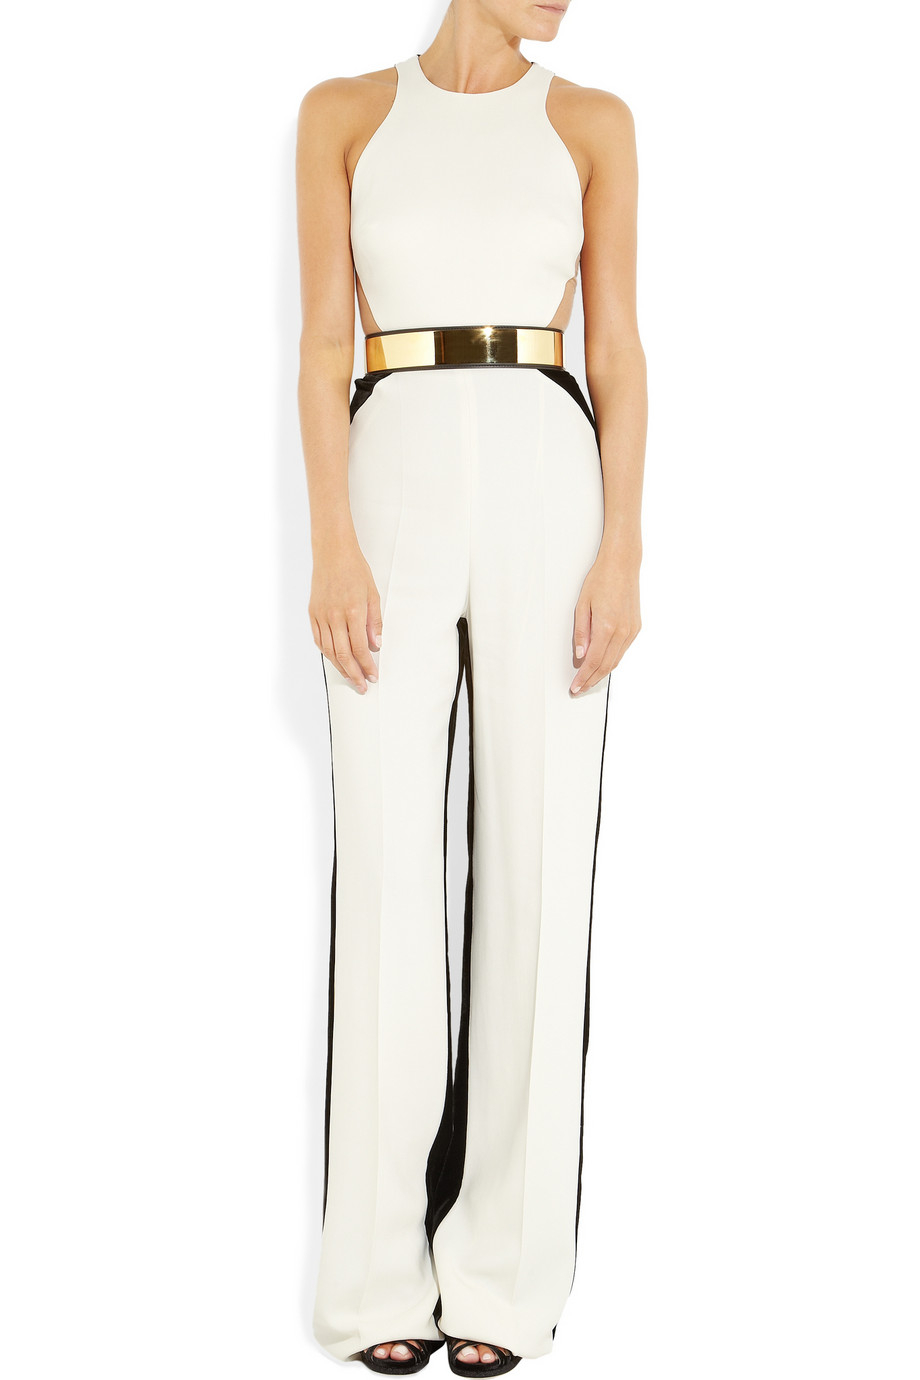 Stella McCartney Anna Stretch Cady and Velvet Jumpsuit in White - Lyst